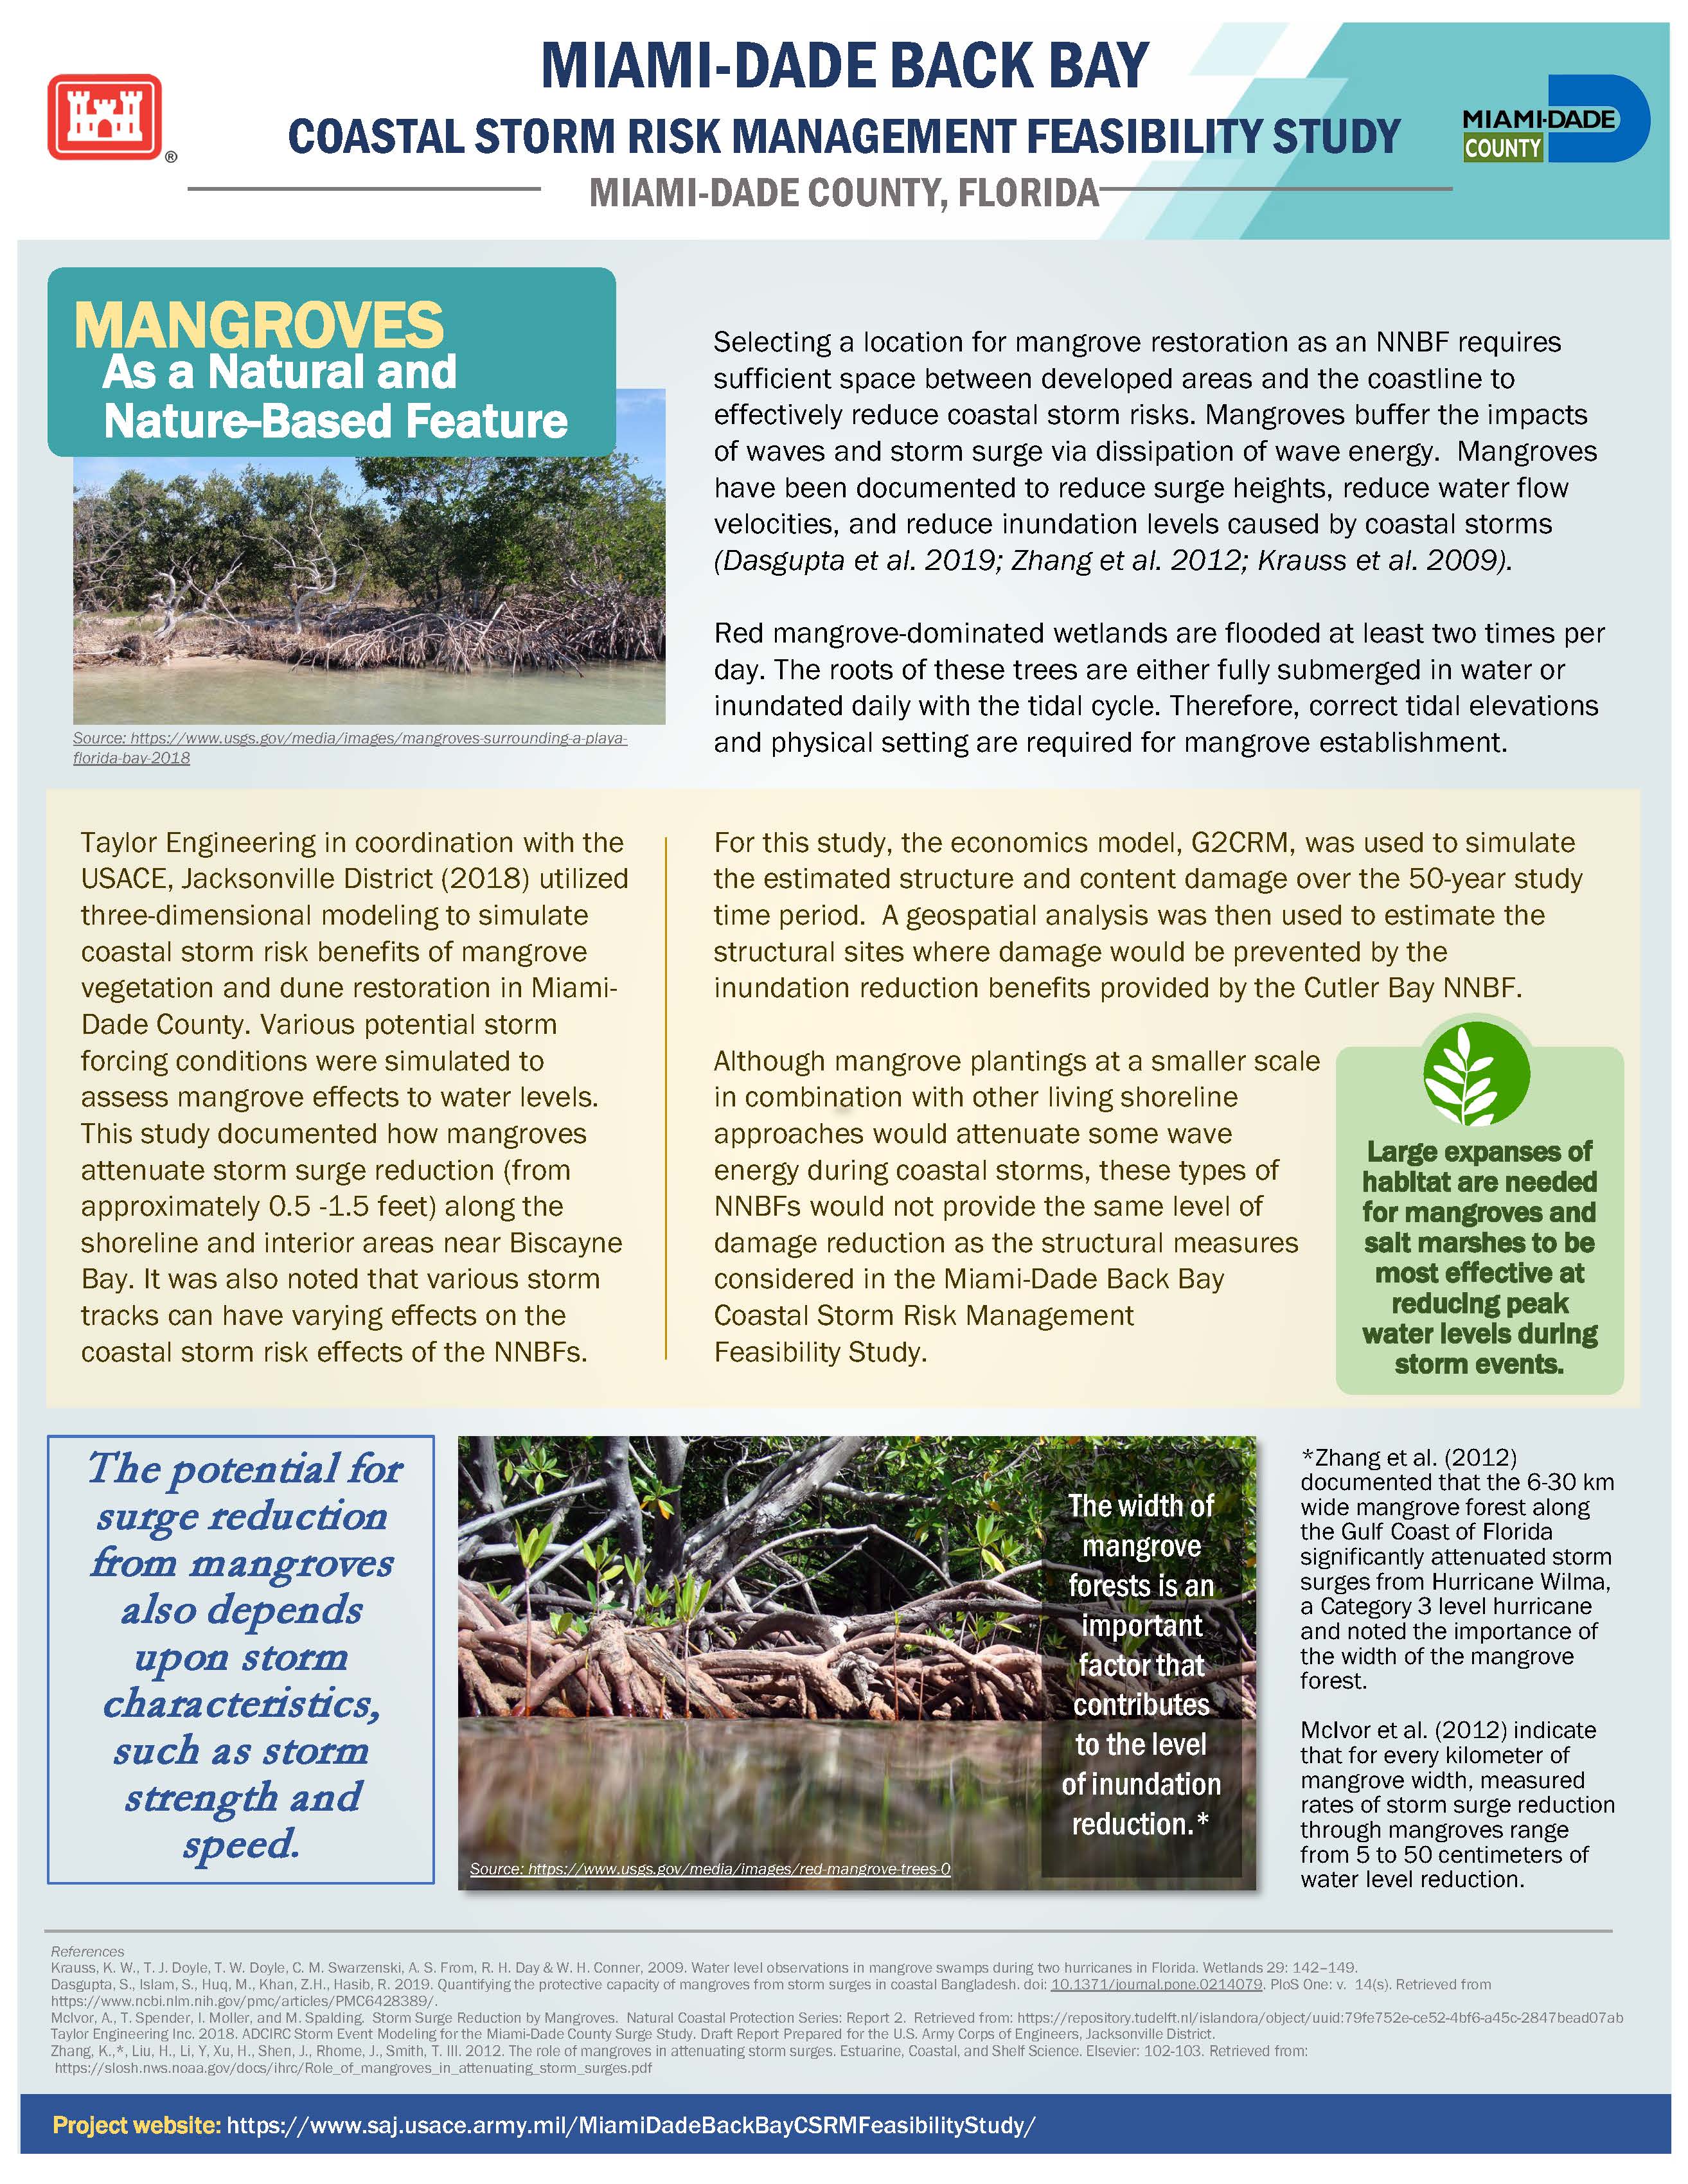 Miami-Dade Back Bay CSRM Natural and Nature-Based Features Fact Sheet, Page 2